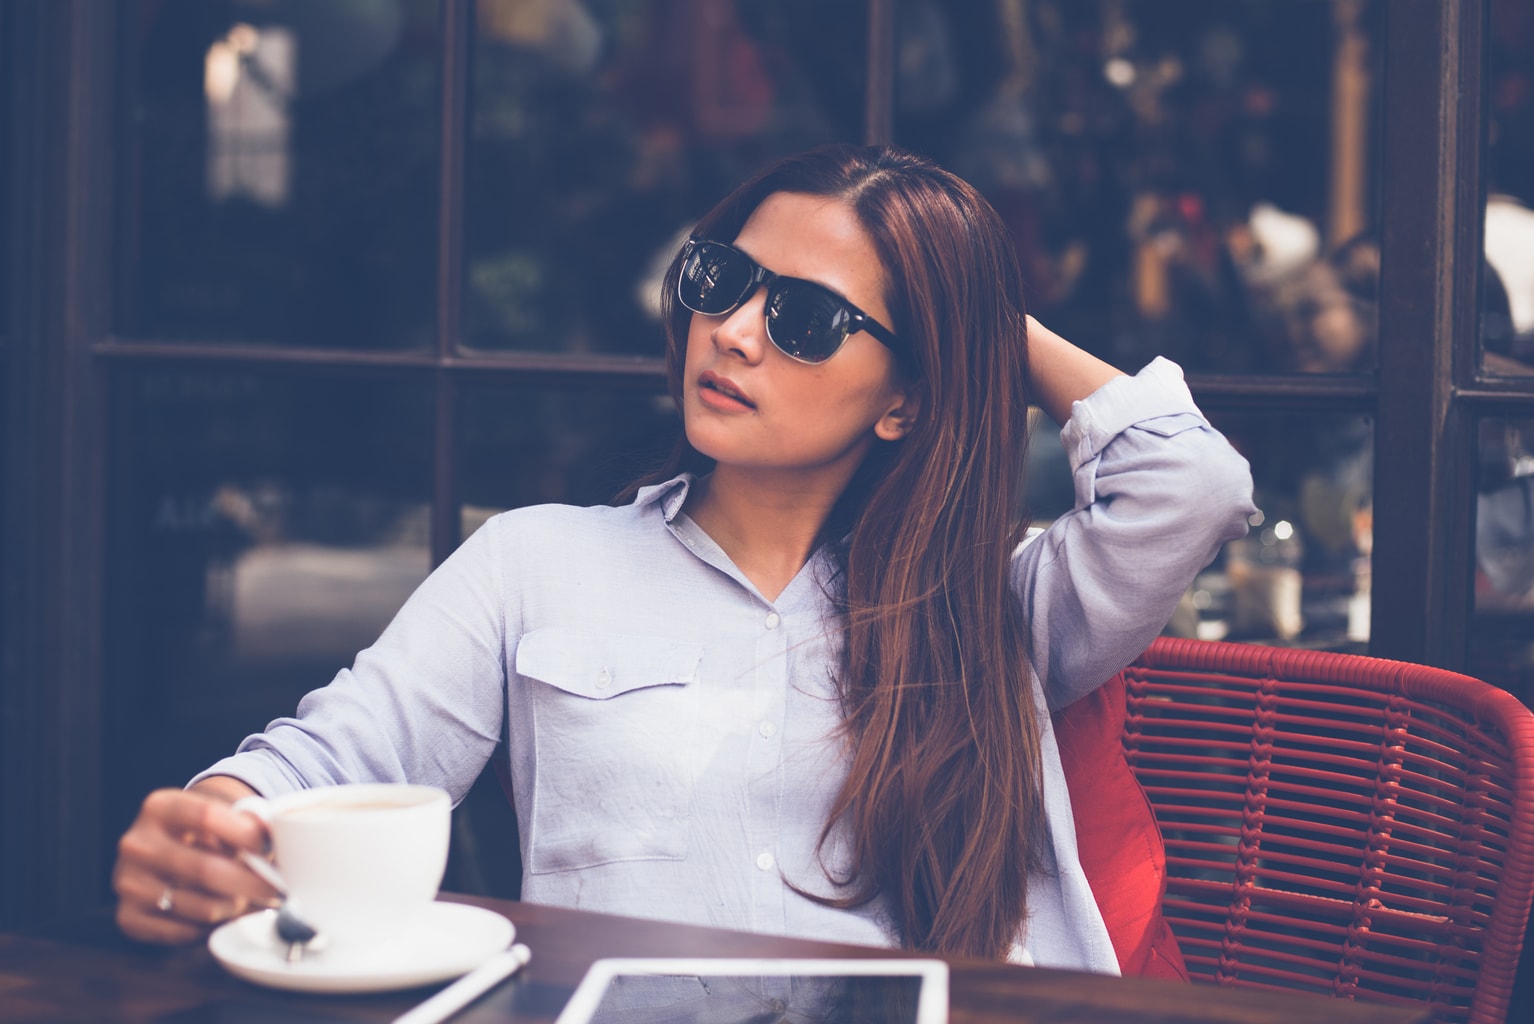 Photo of a young woman wearing sunglasses and a button-up shirt, sitting at a table in a cafe holding a coffee cup